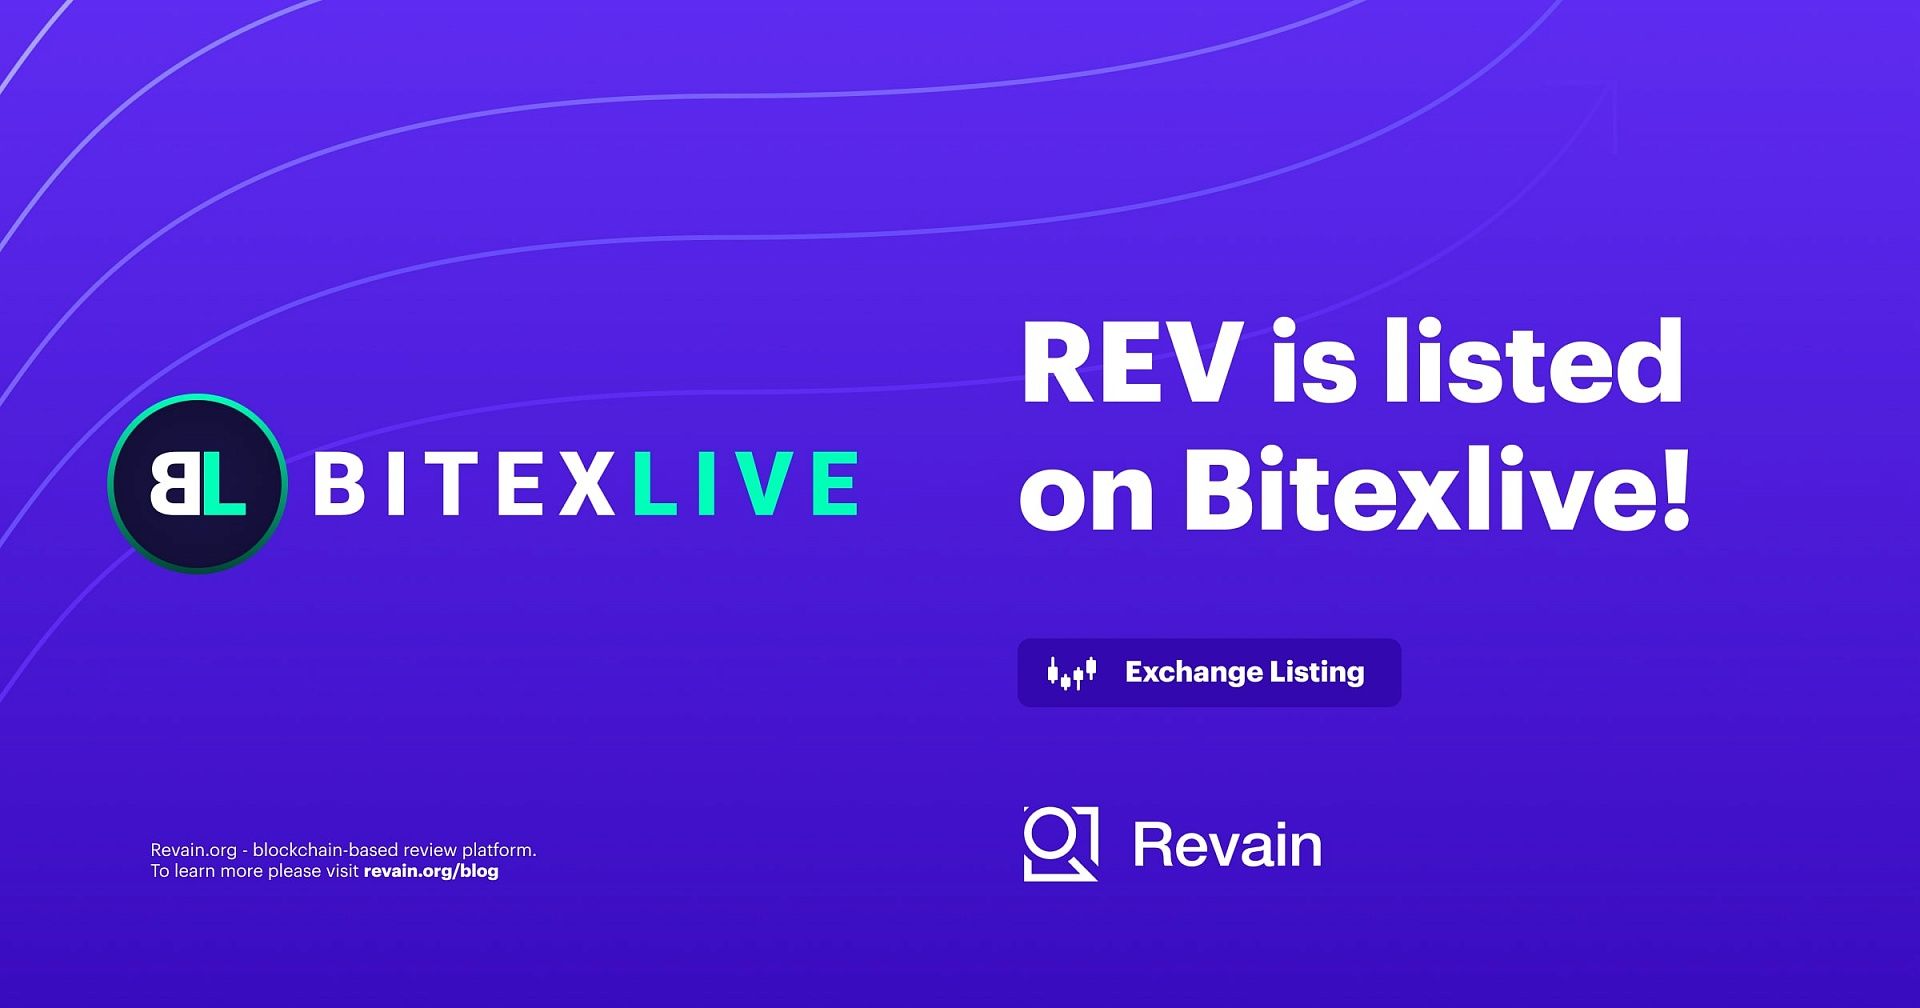 Article REV is listed on the Bitexlive exchange